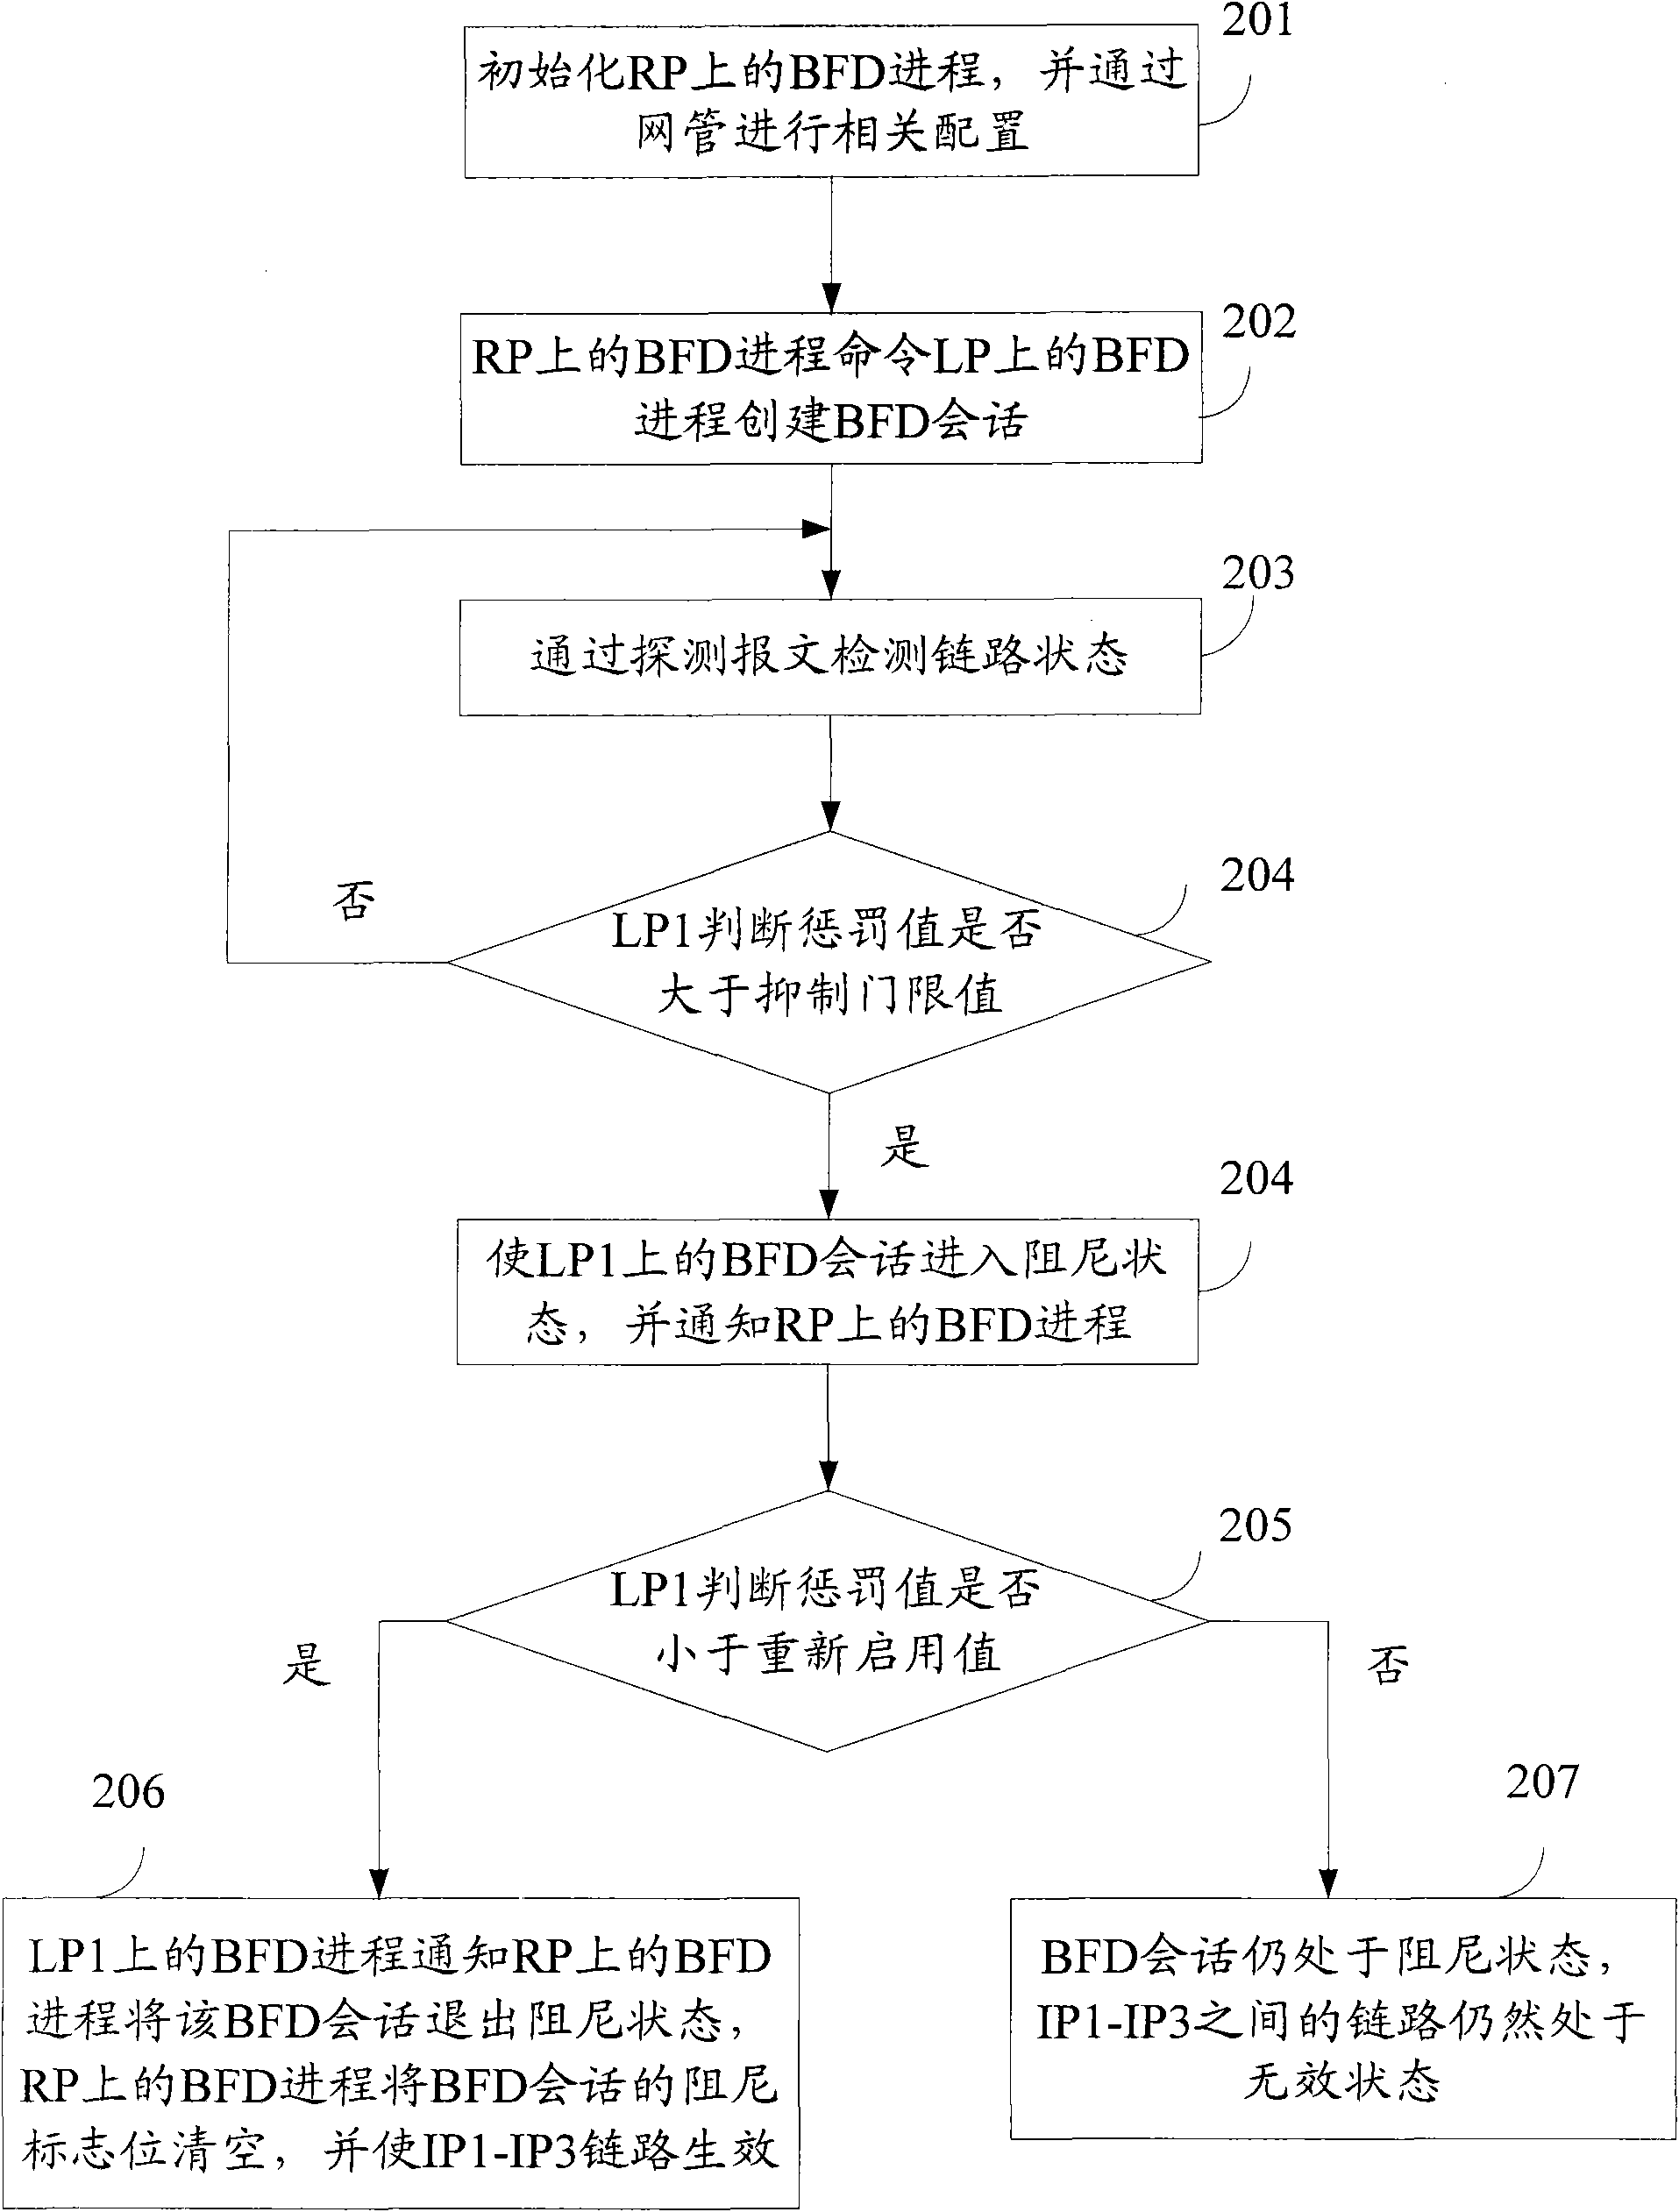 Method and device of bidirectional forwarding detection (BFD) oscillation damping